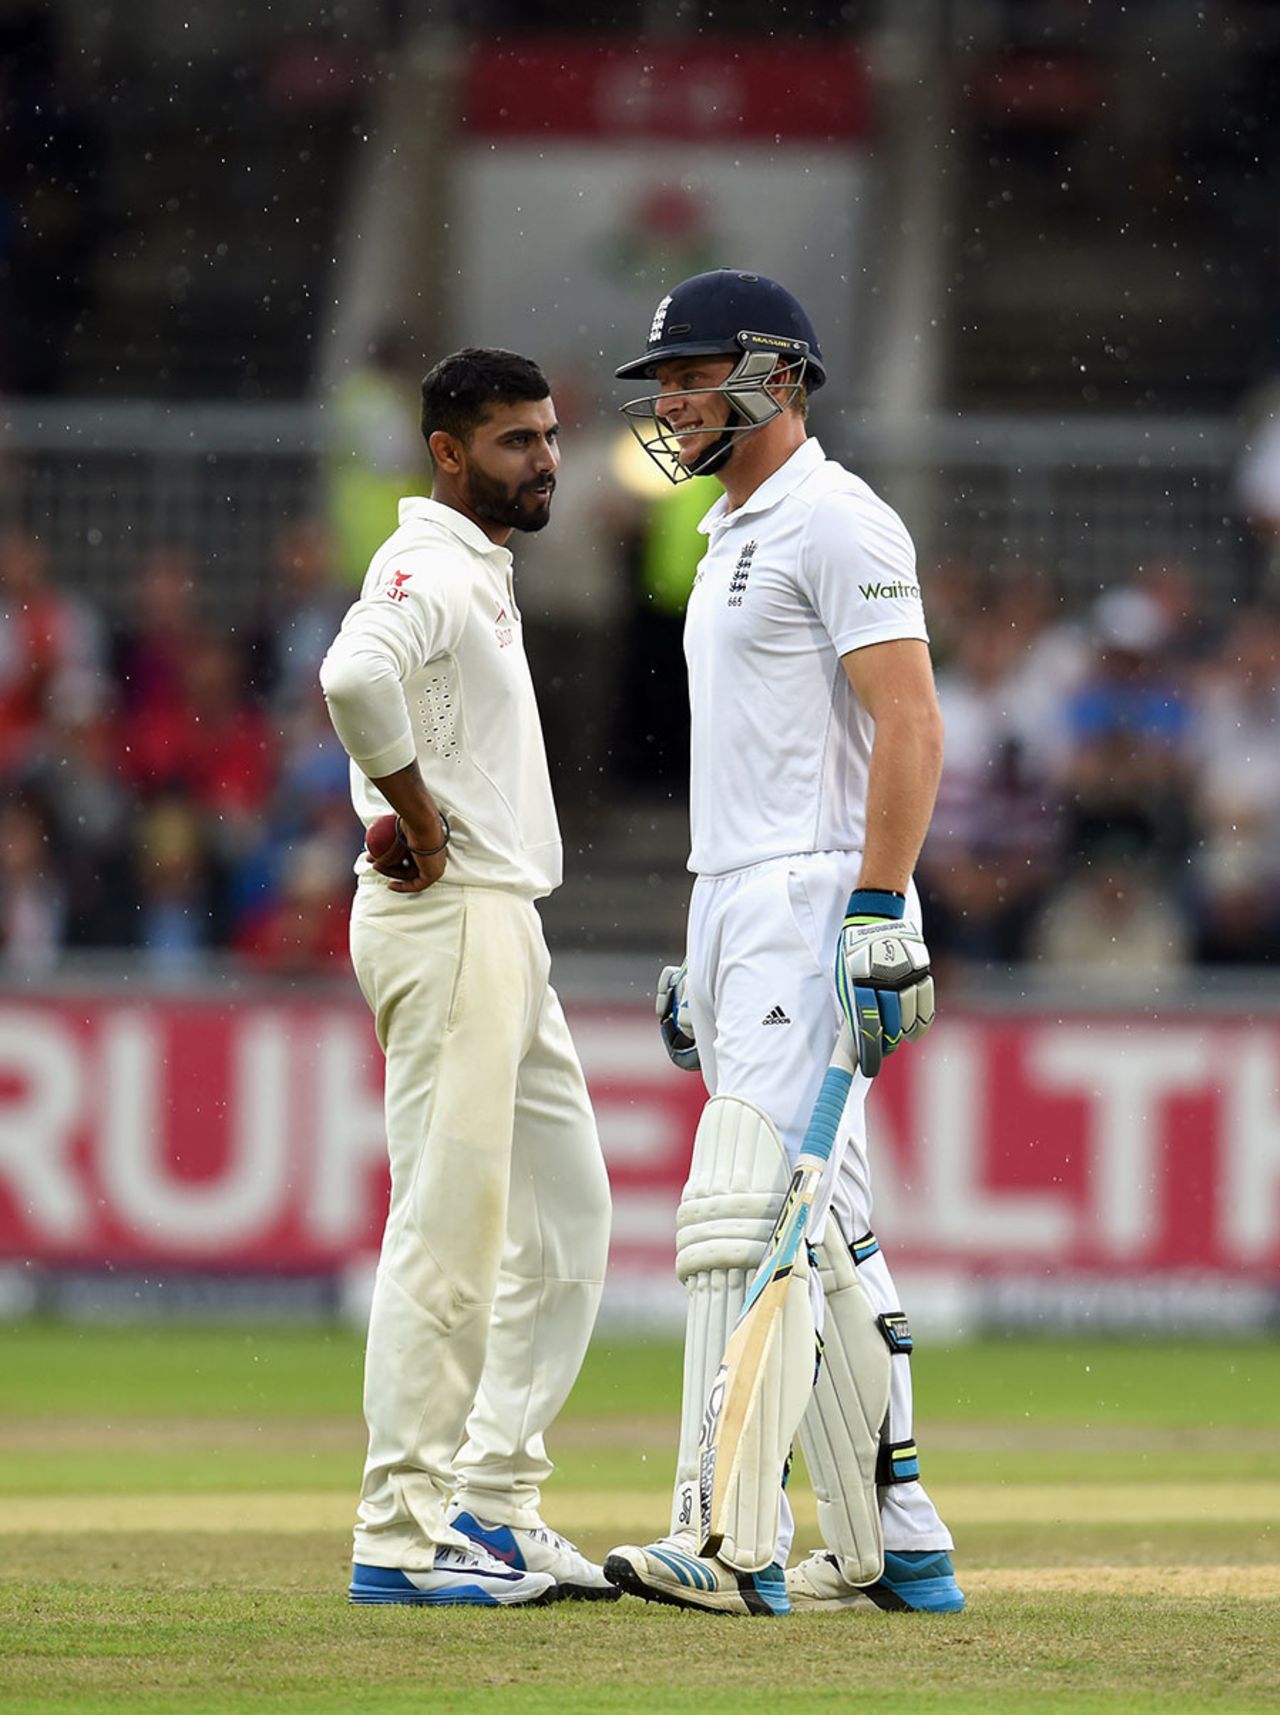 Ravindra Jadeja has a word with Jos Buttler as the players leave the field for rain, England v India, 4th Test, Old Trafford, 2nd day, August 8, 2014